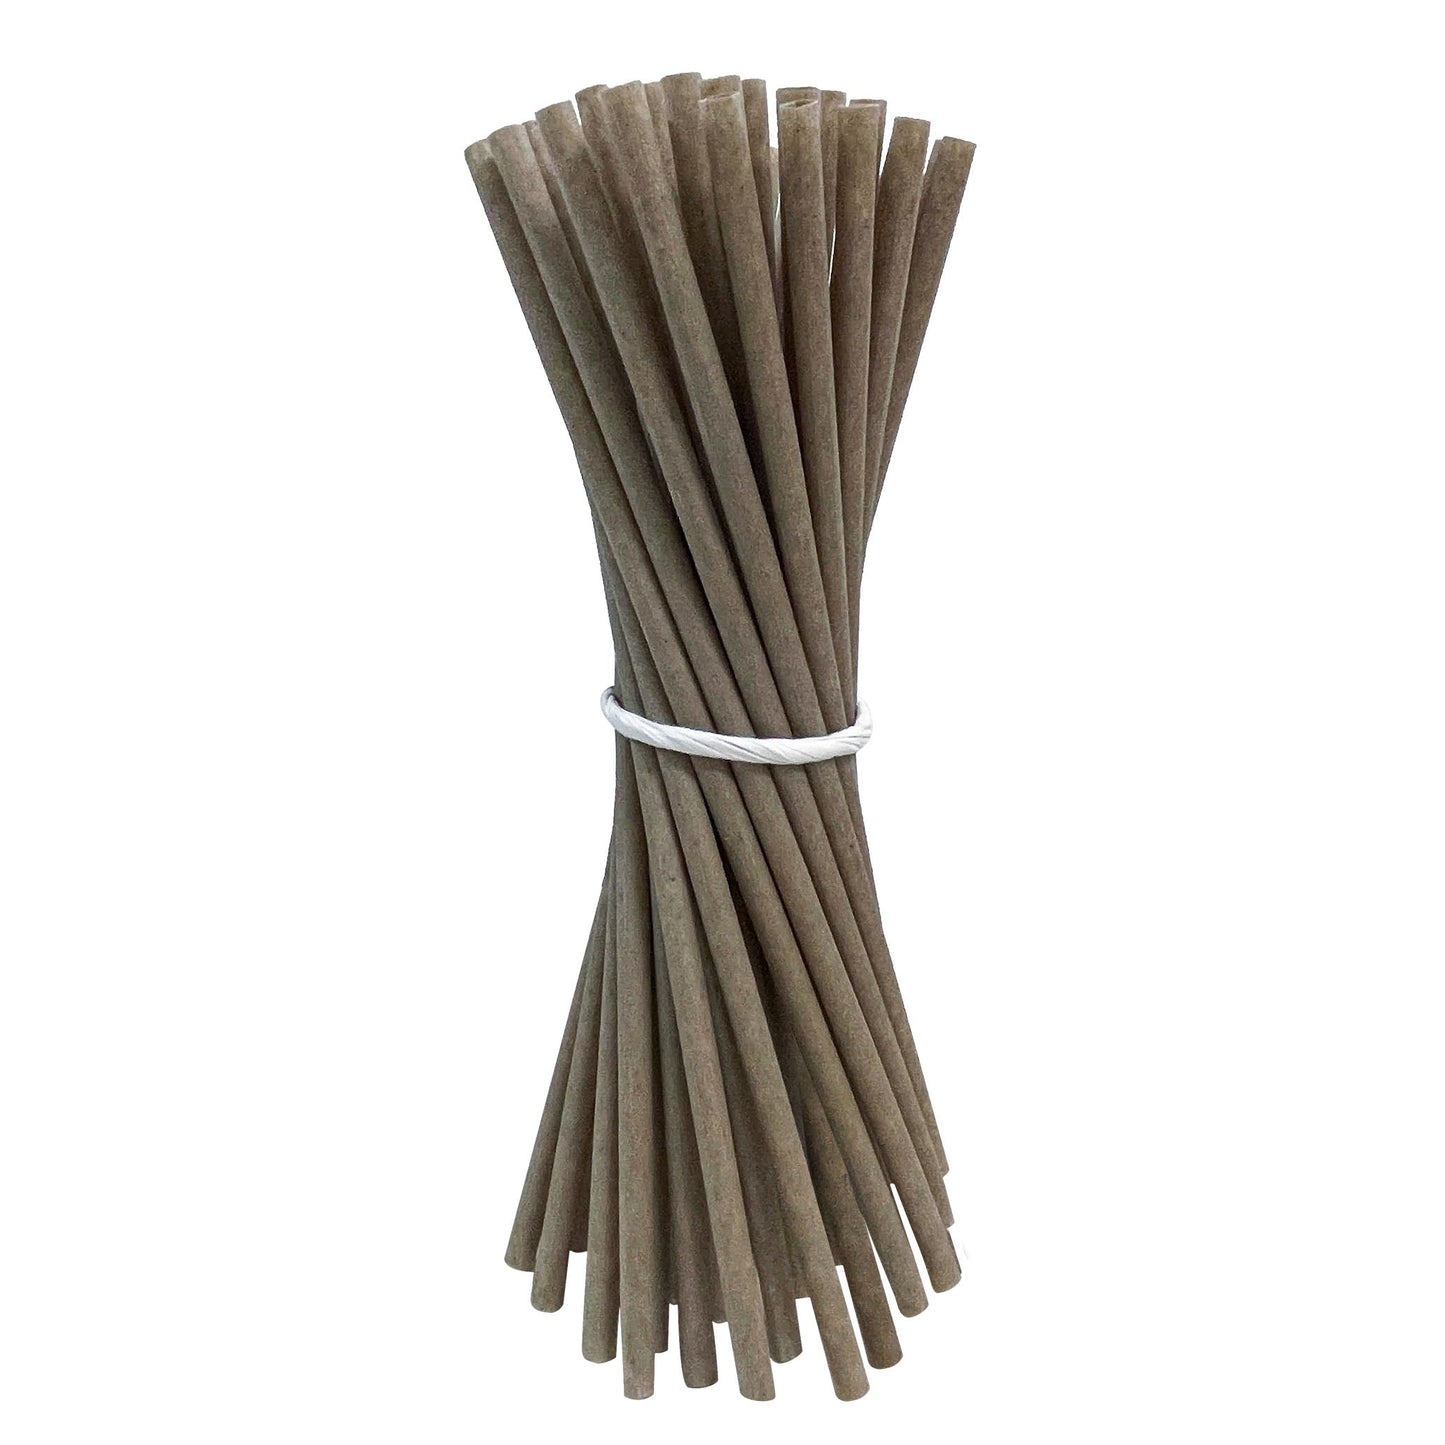 
                  
                    EQUO Coffee Drinking Straws (Wholesale/Bulk), Cocktail Size - 1000 count
                  
                